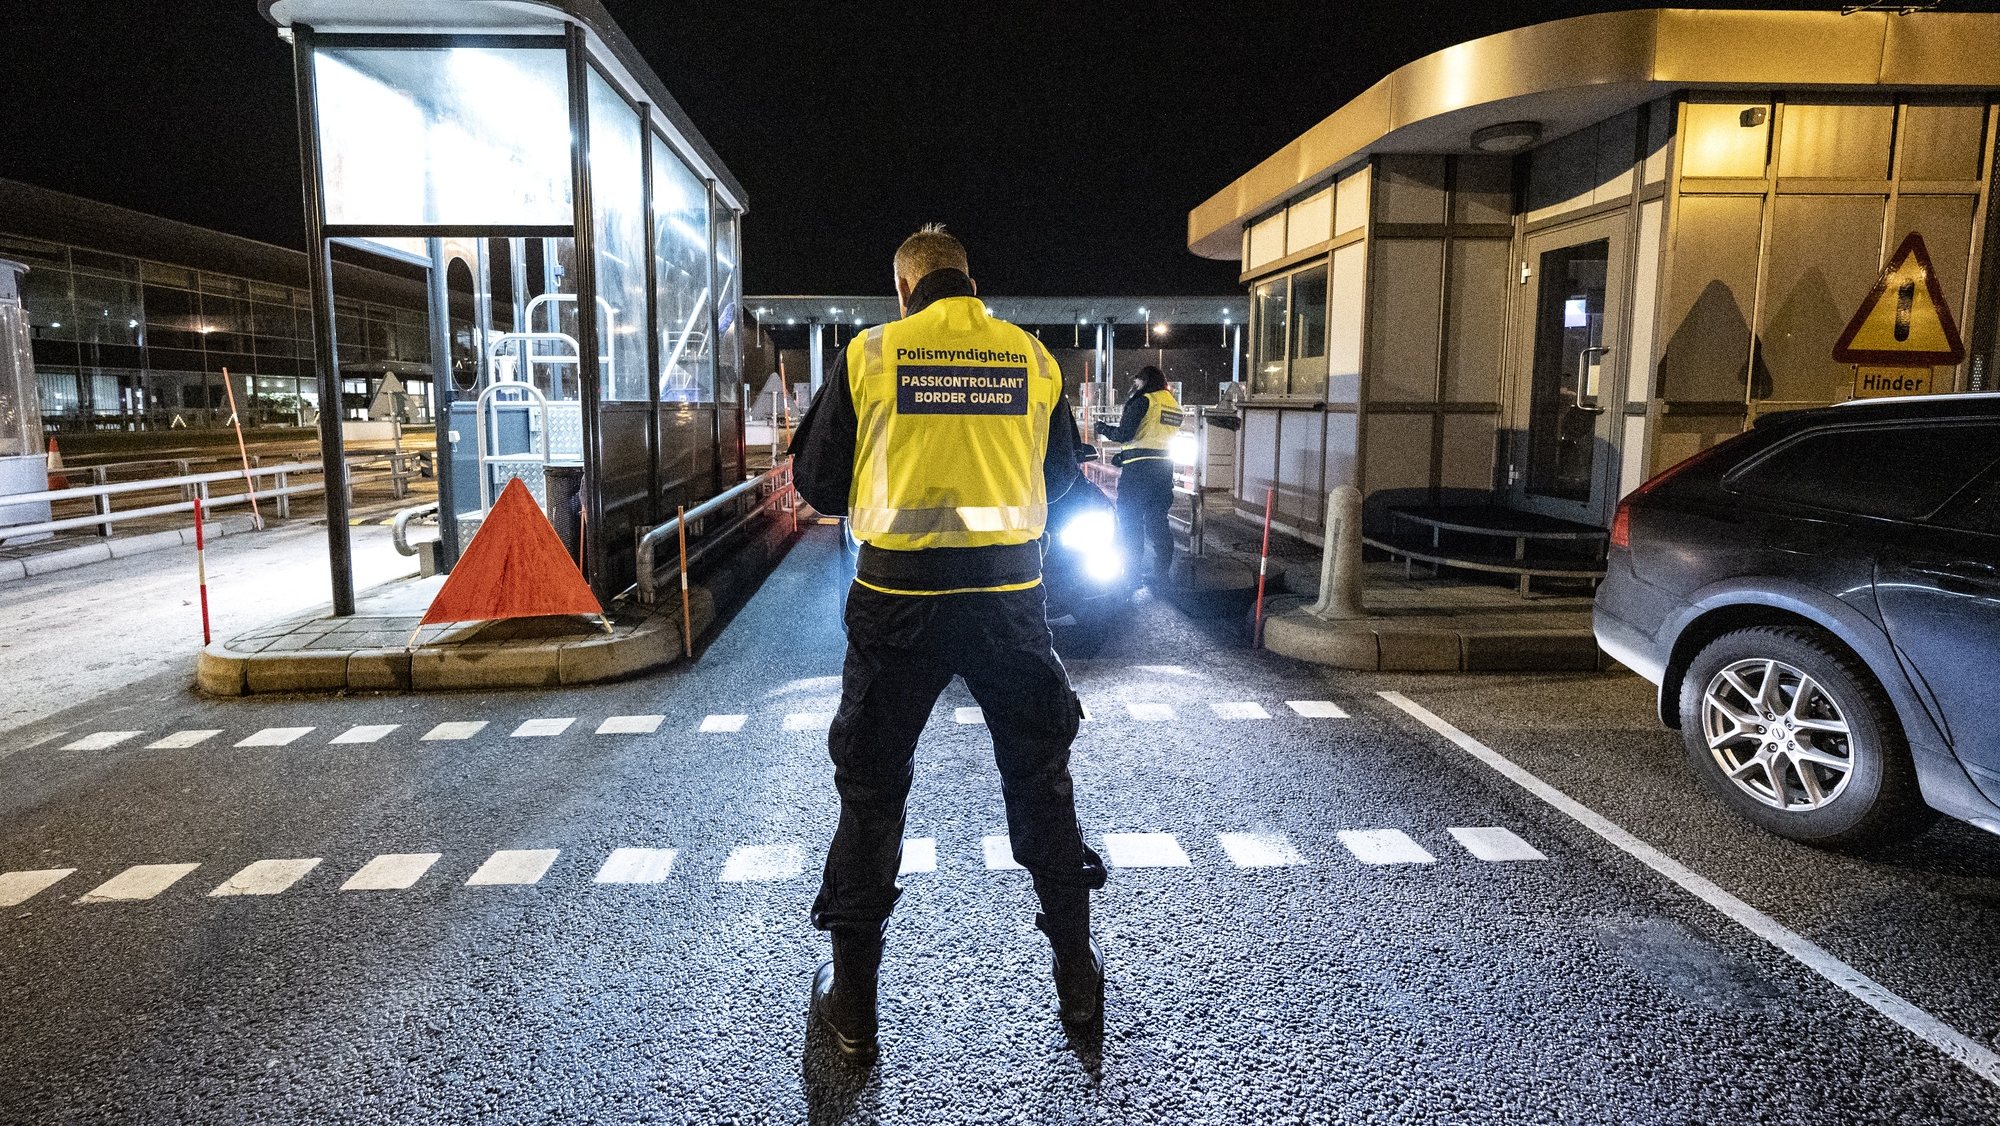 epa08899207 Swedish border police conduct checks at Oresund bridge, which links Sweden to Denmark, near Malmo, Sweden, 22 December 2020. The Swedish government decided to close its border to visitors from Denmark on 22 December due to the spreading of the coronavirus disease (COVID-19).  EPA/JOHAN NILSSON  SWEDEN OUT